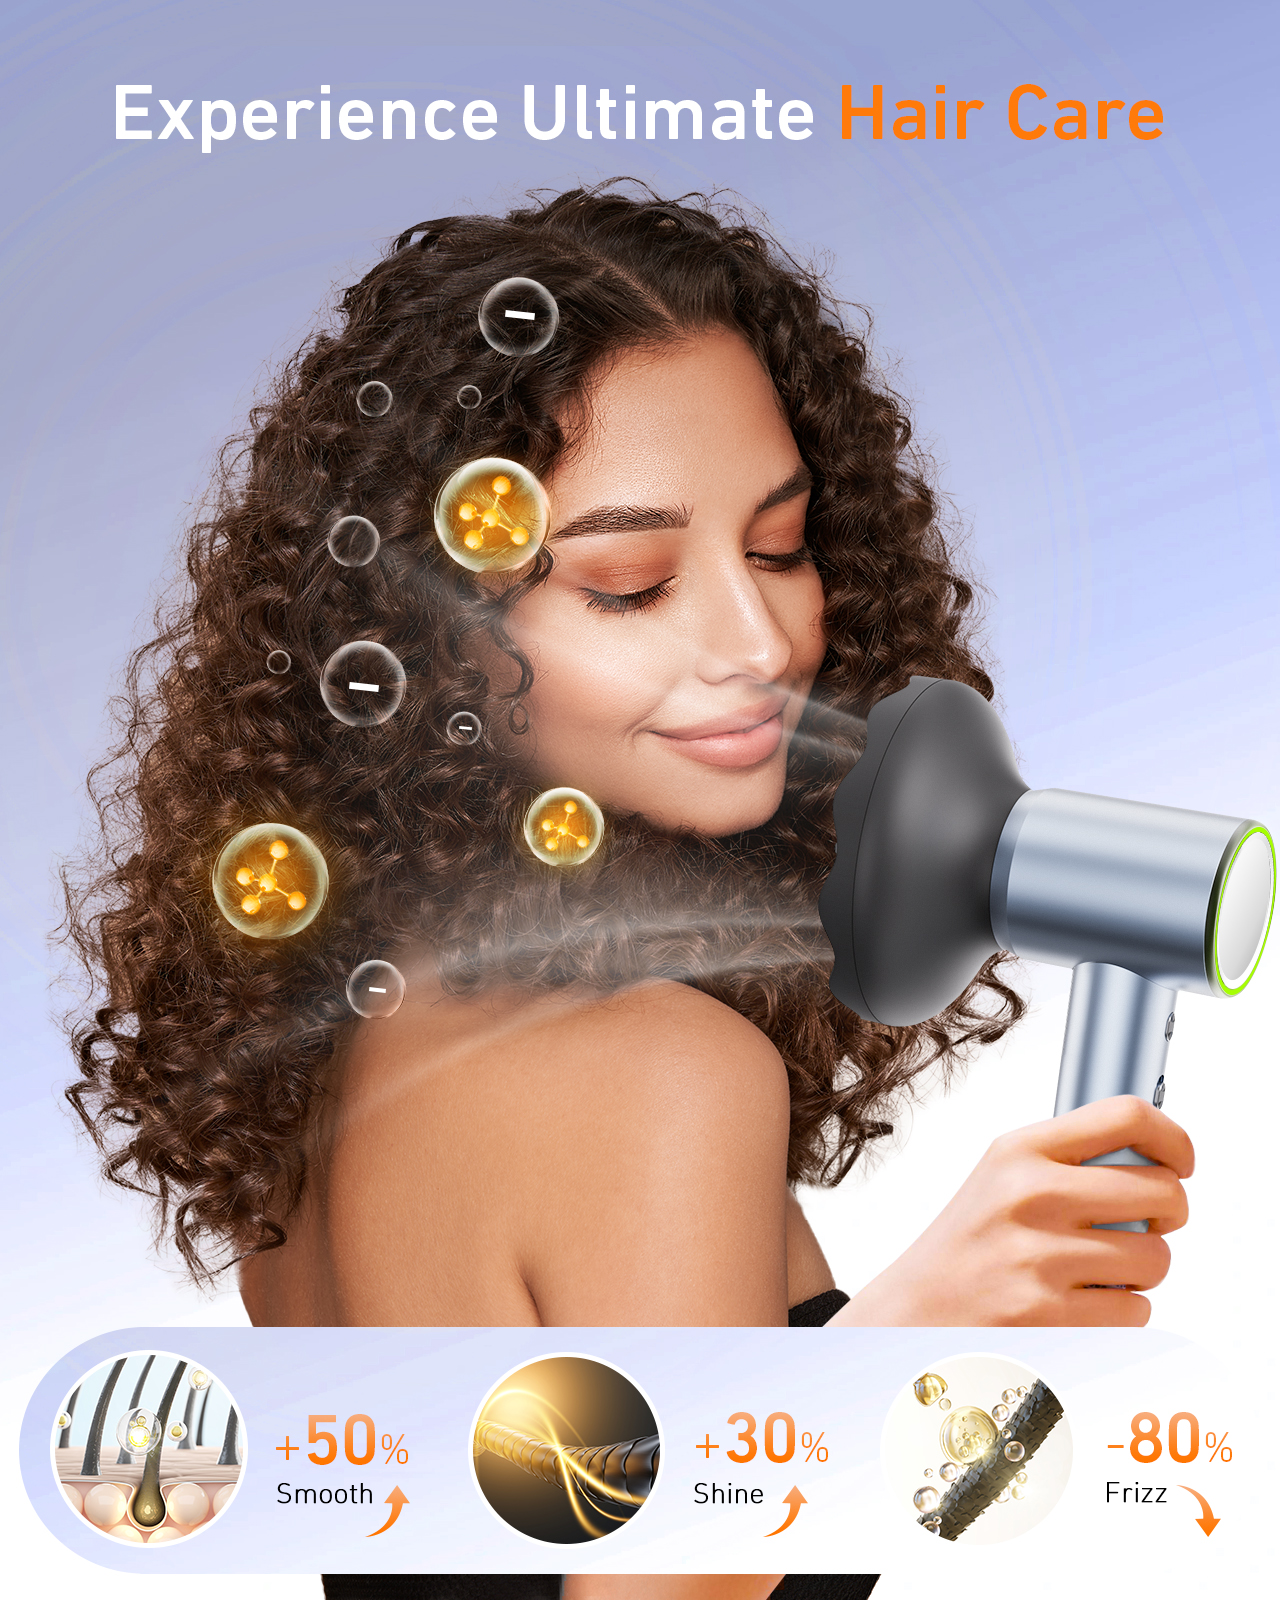 Woman drying short hair with gray handheld dryer